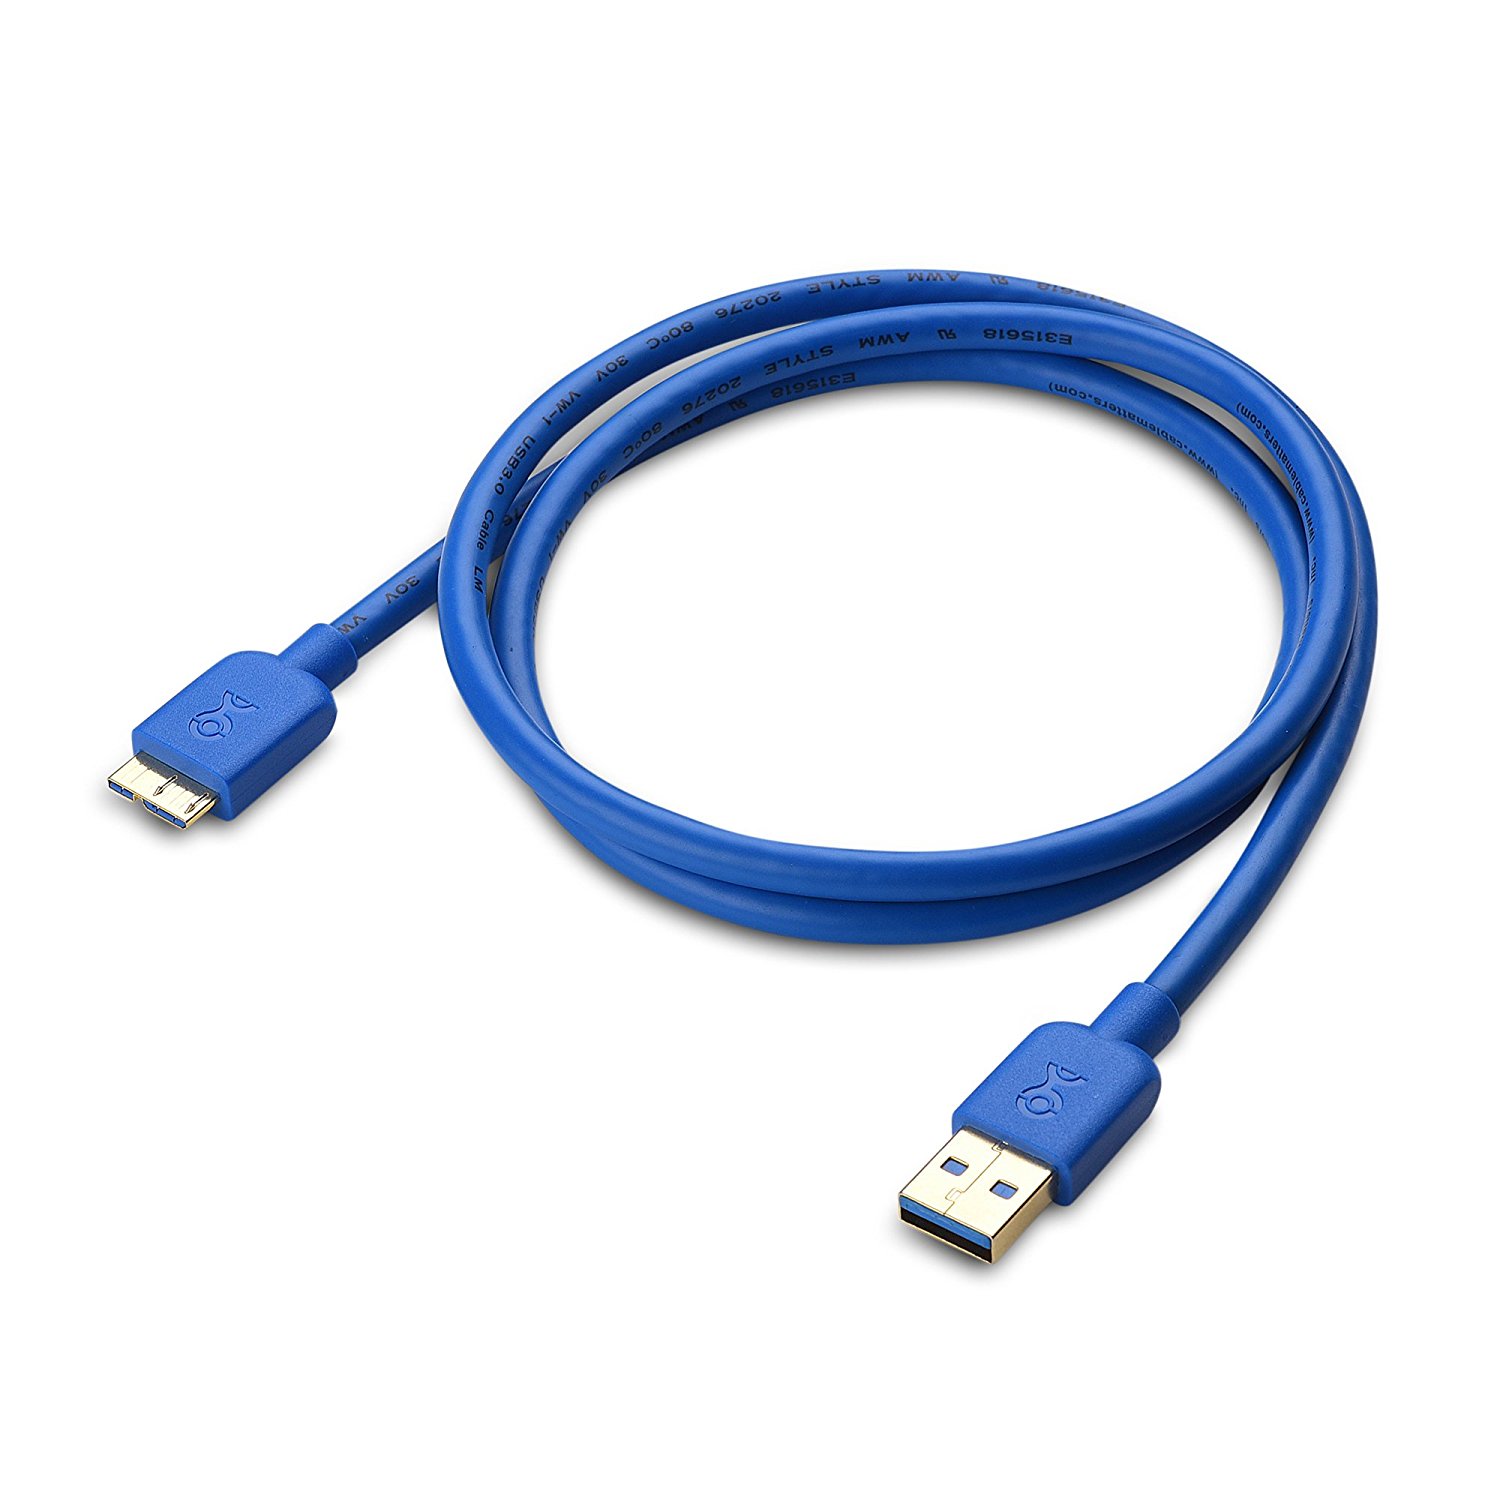 Amazon.com: Cable Matters SuperSpeed USB 3.0 Type A to Micro-B Cable ...